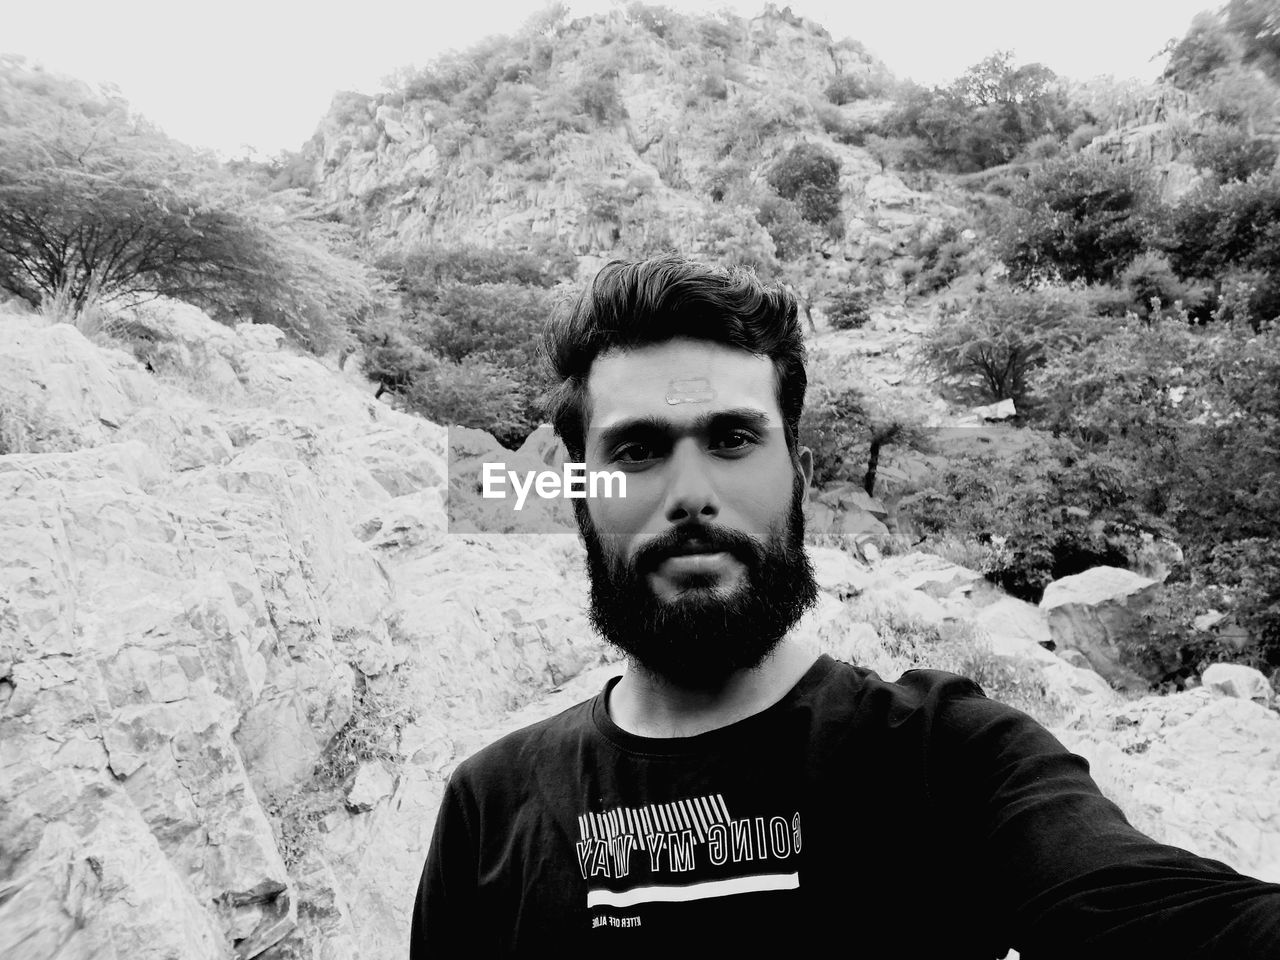 portrait, one person, looking at camera, front view, black and white, young adult, leisure activity, men, monochrome photography, black, beard, monochrome, lifestyles, adult, day, casual clothing, facial hair, headshot, nature, white, mountain, standing, land, waist up, outdoors, person